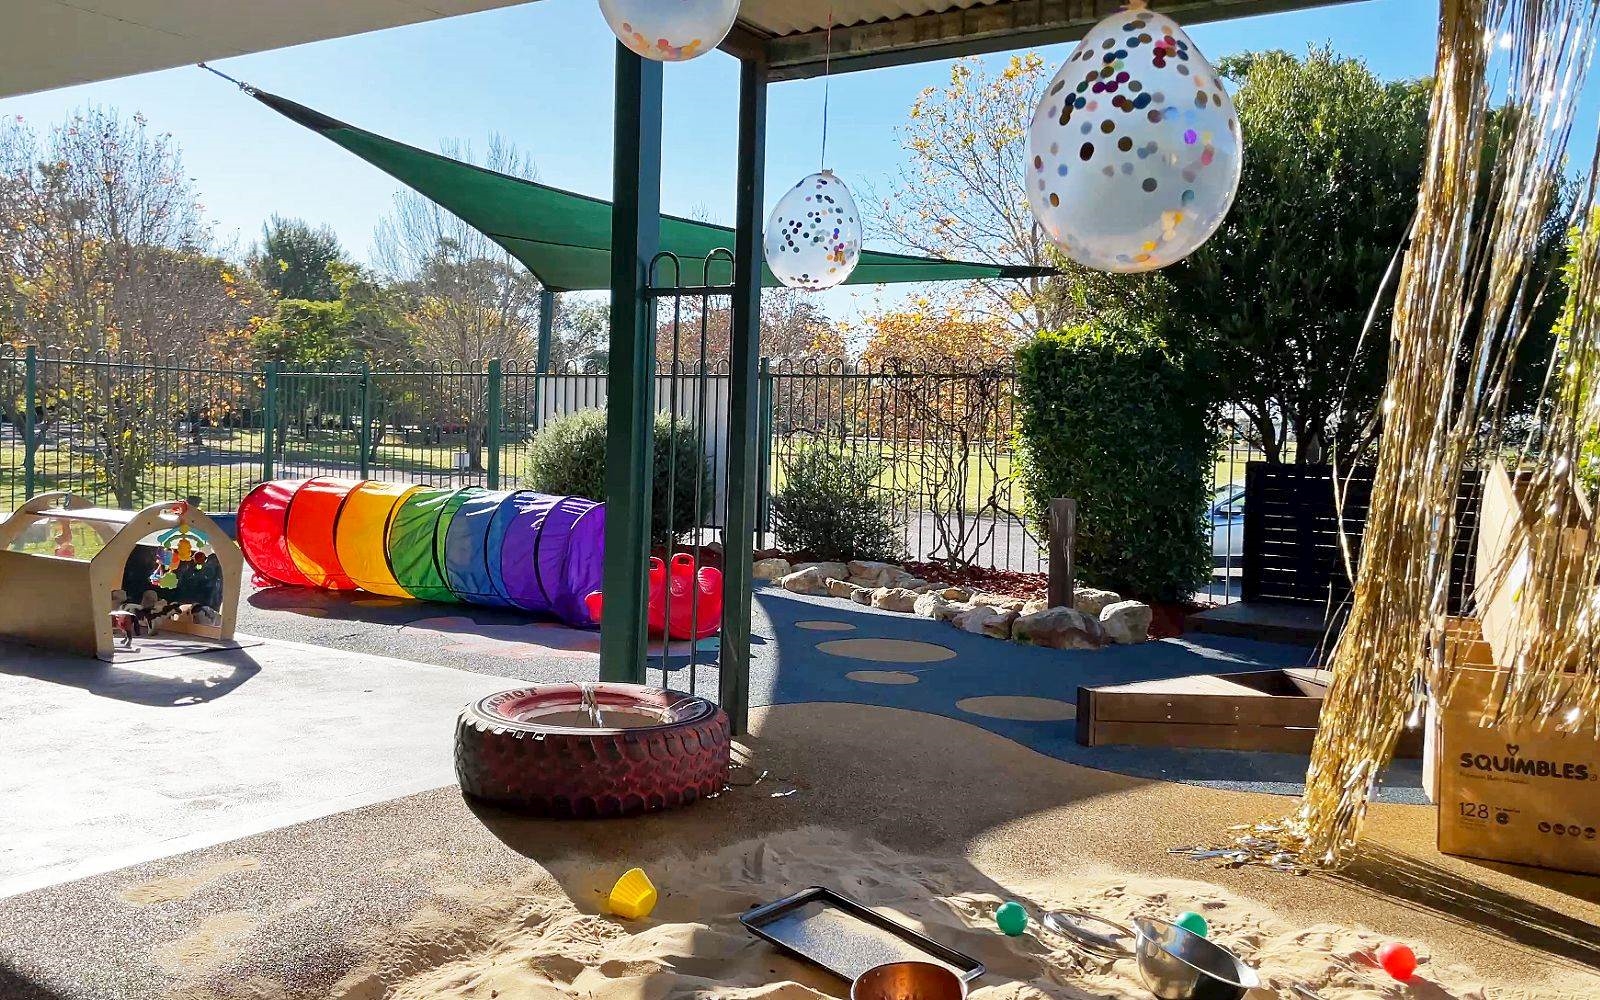 Rainbows Early Learning Centre